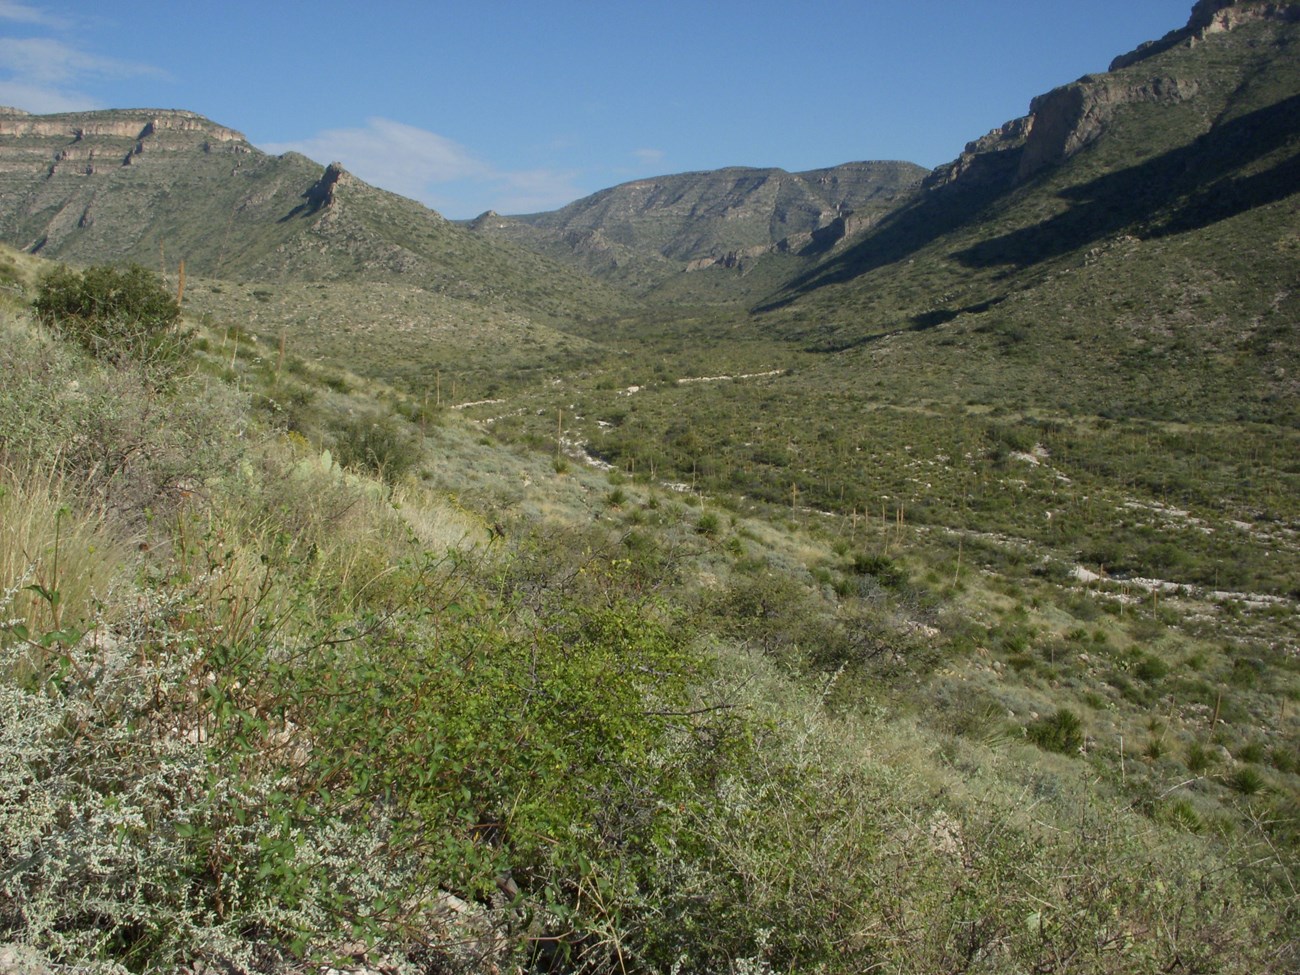 View from the Slaughter Canyon trailhead